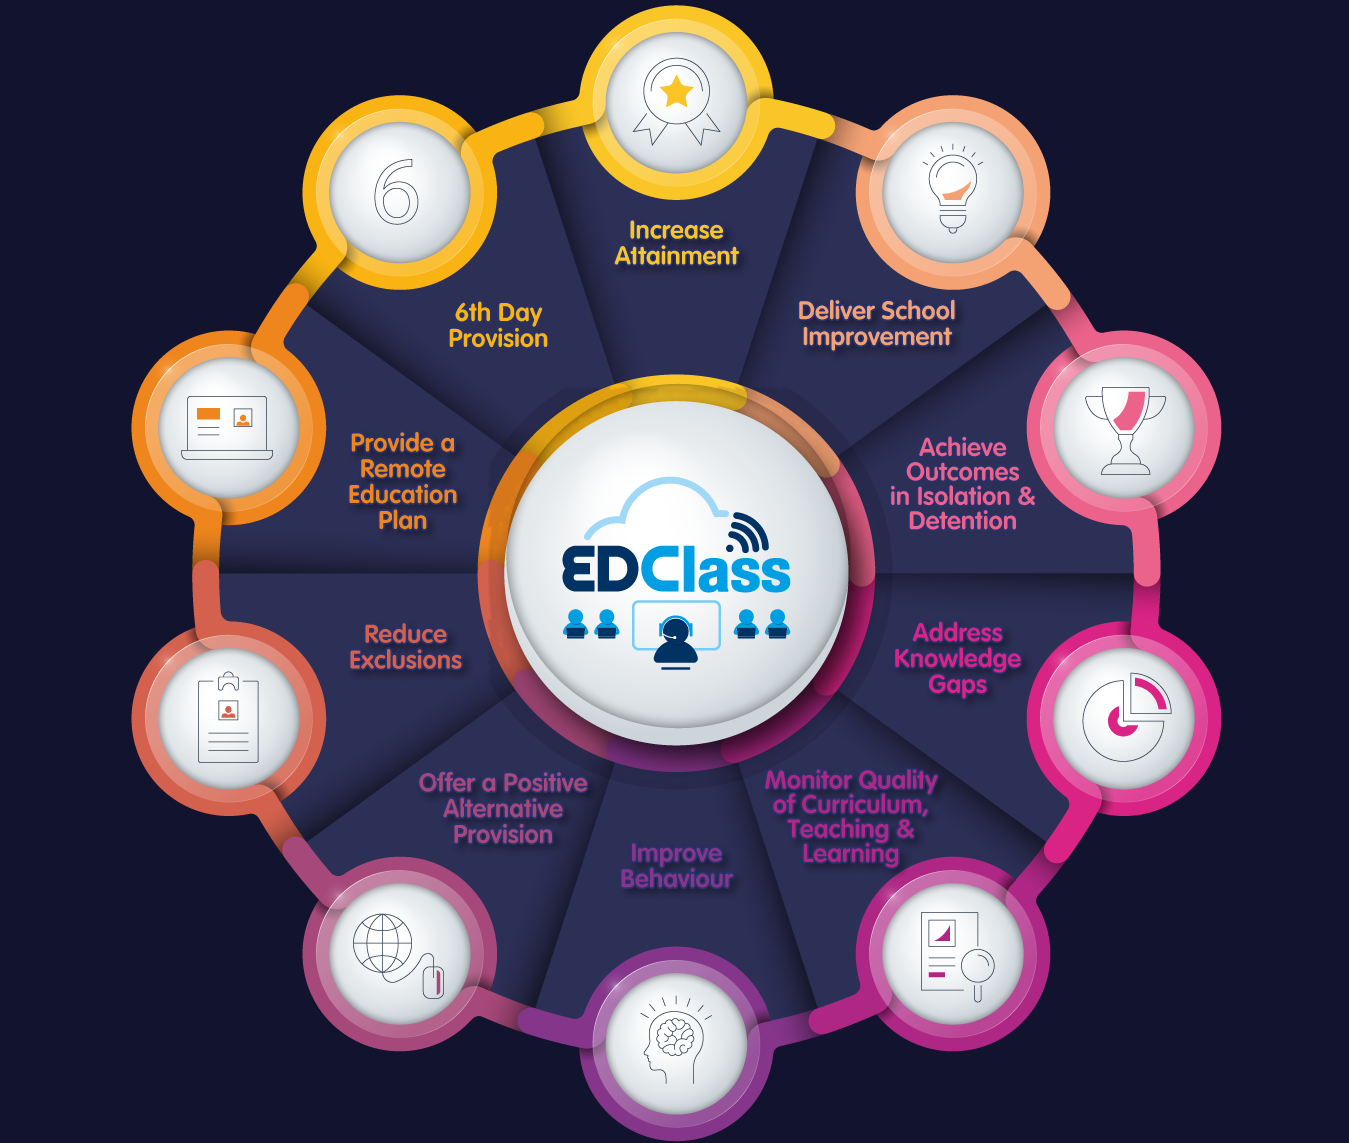 Increase Attainment, Deliver School Improvement, Achieve Outcomes in Isolation and Detention, Address Knowledge Gaps, Monitor Quality of Curriculum, Teaching and Learning,Improve Behaviour, Offer a Positive Alternative Provision, Reduce Exclusions, Provide a Remote Education Plan, 6th day Provision. All with EDClass.